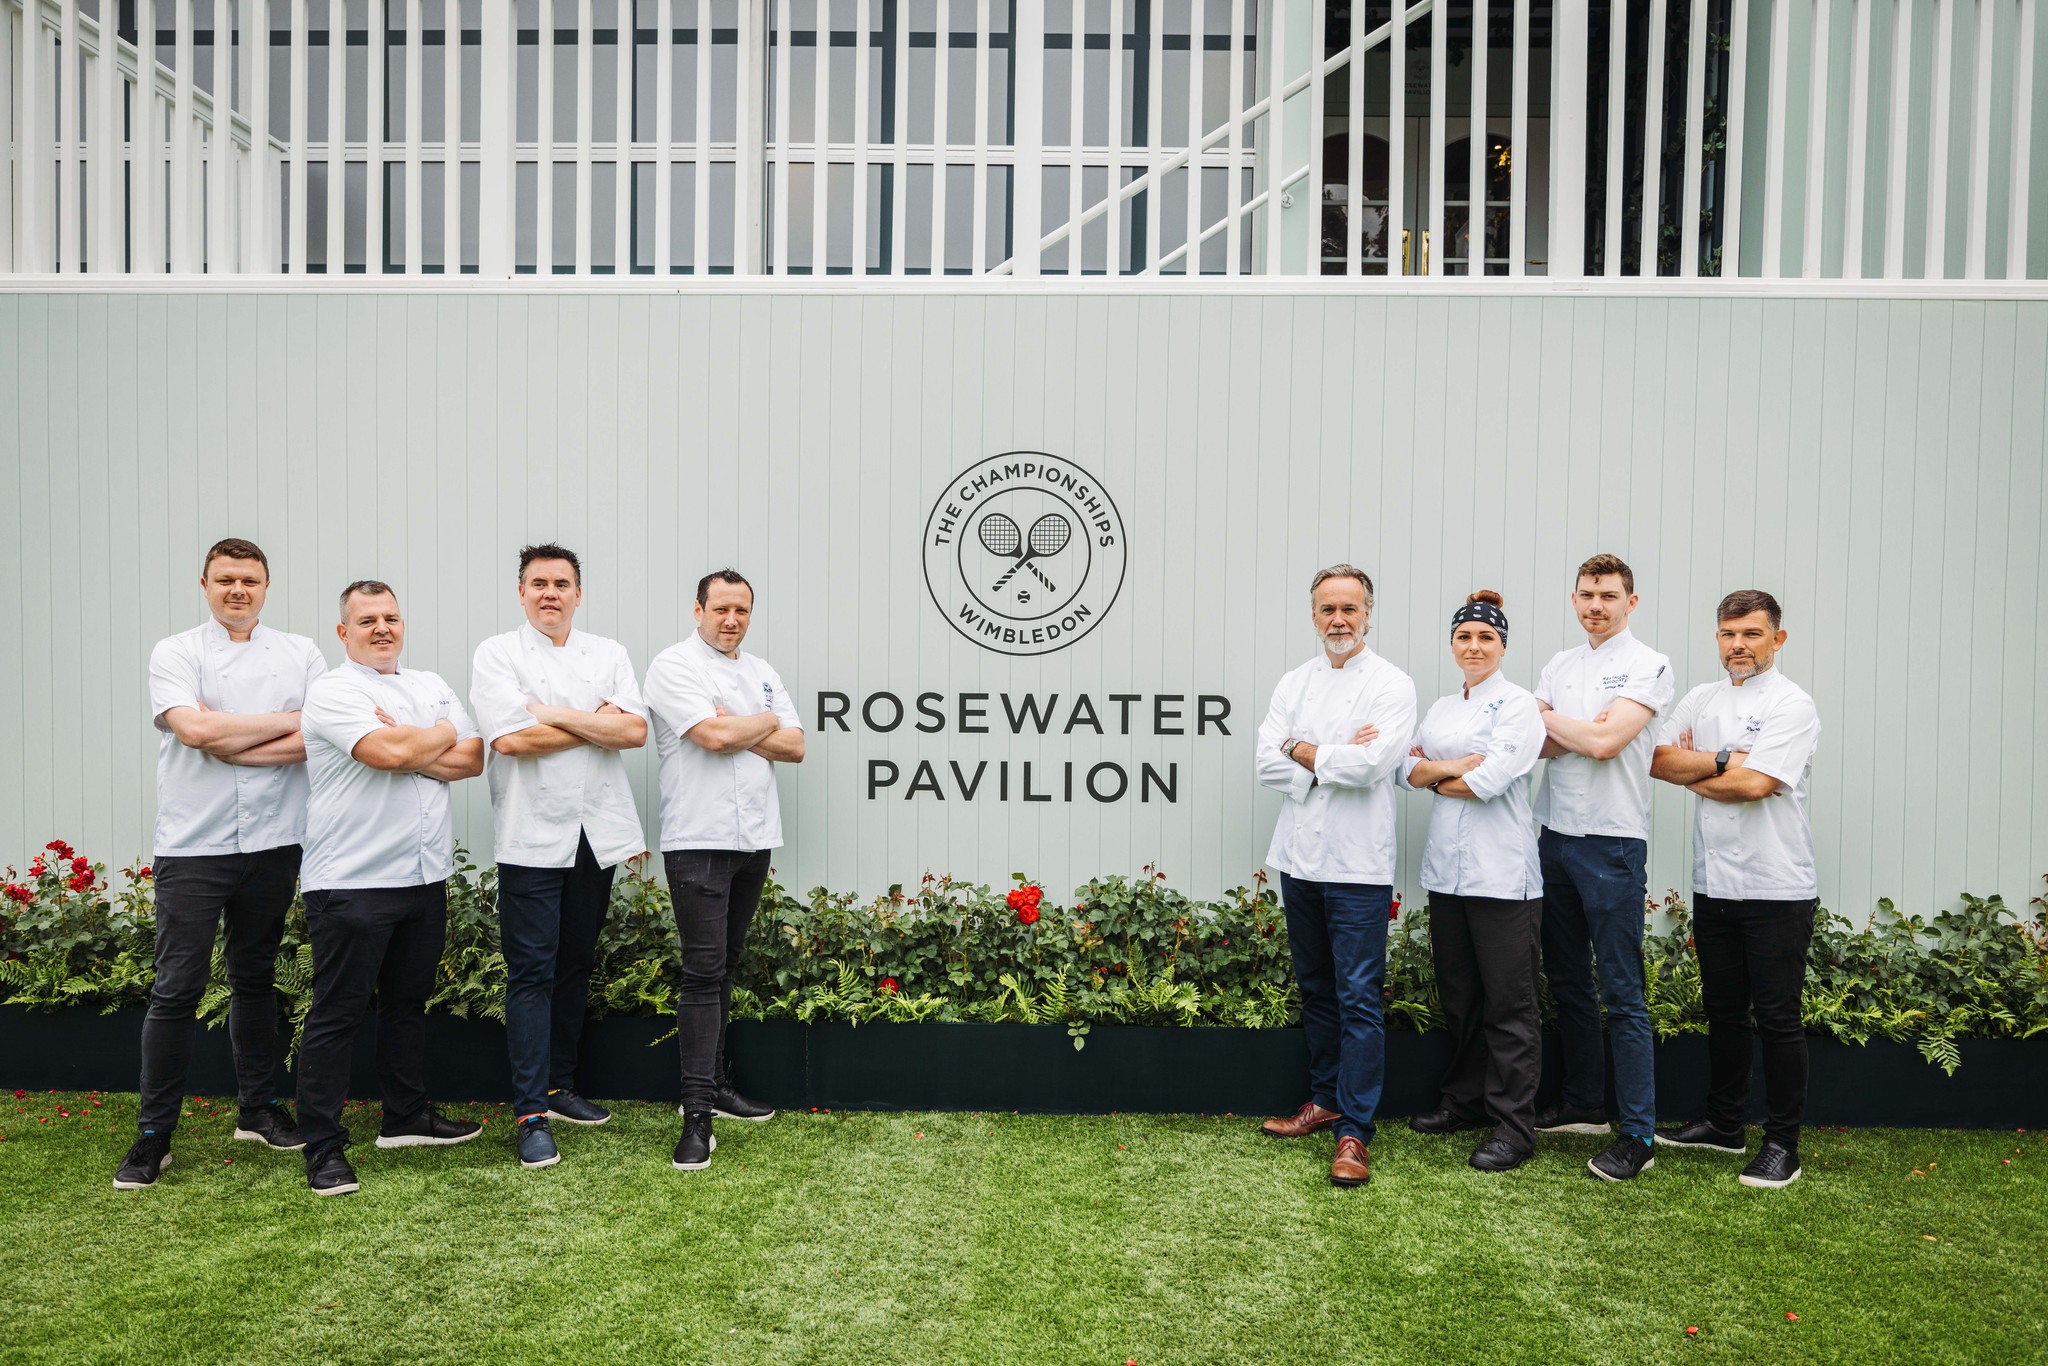 Eight chefs standing in front of Rosewater Pavilion at 2023 Wimbledon Championships 